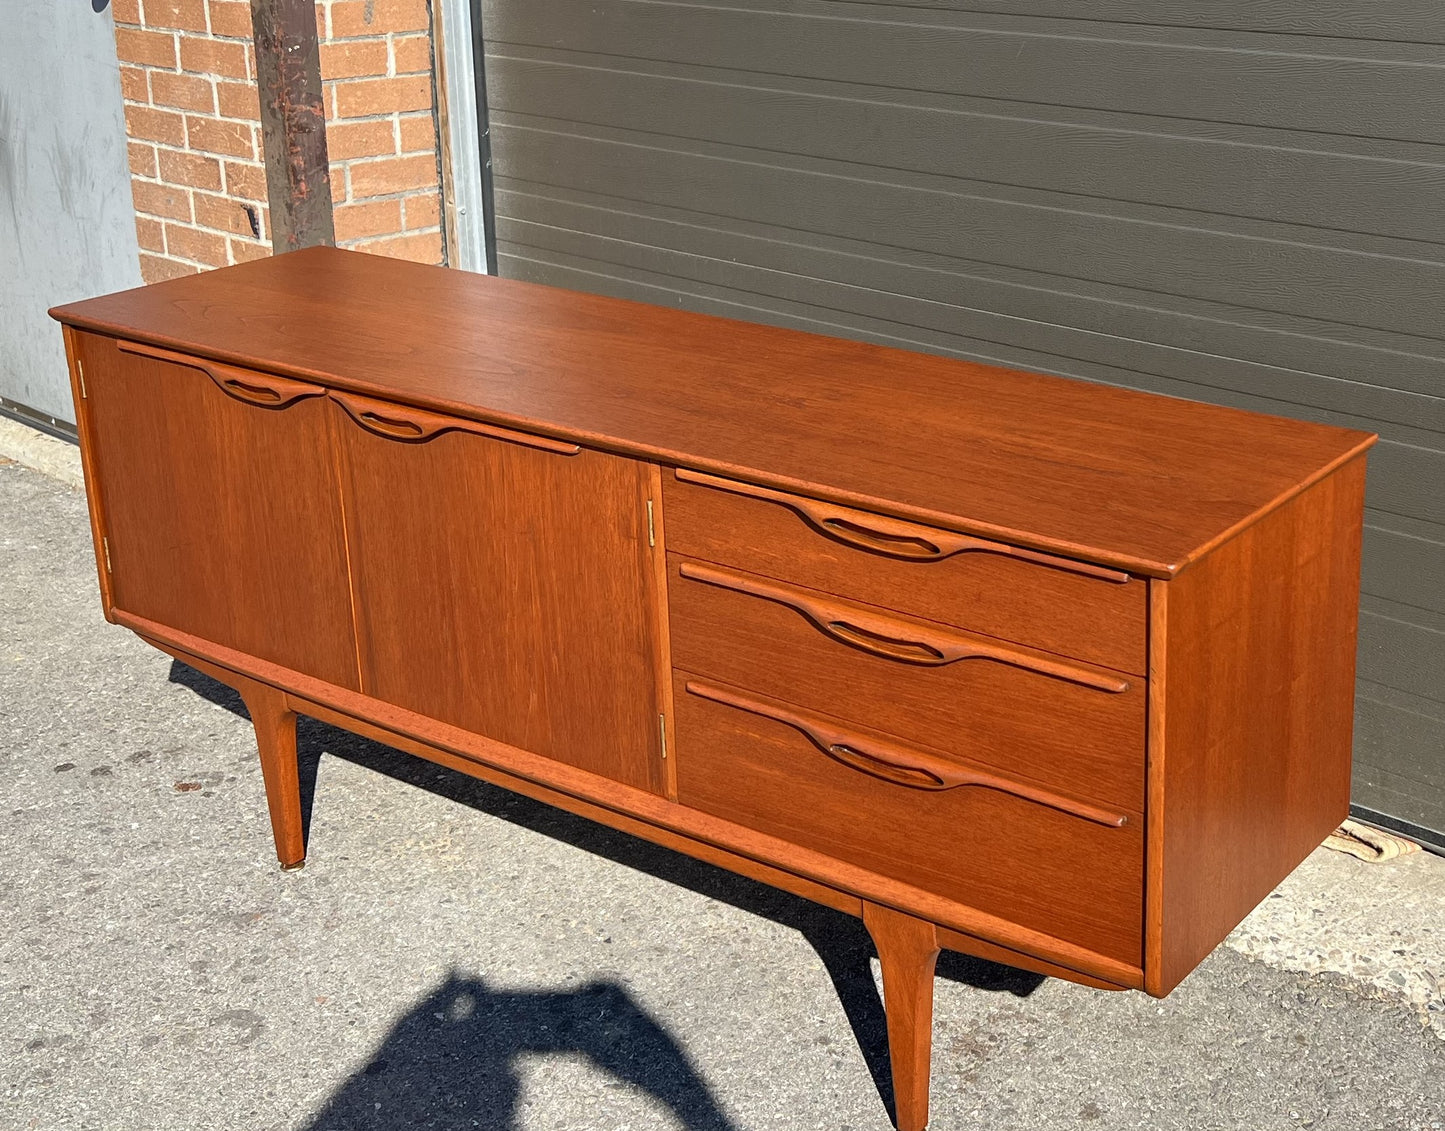 REFINISHED Mid Century Modern Sideboard by T.Robertson for McIntosh 66"